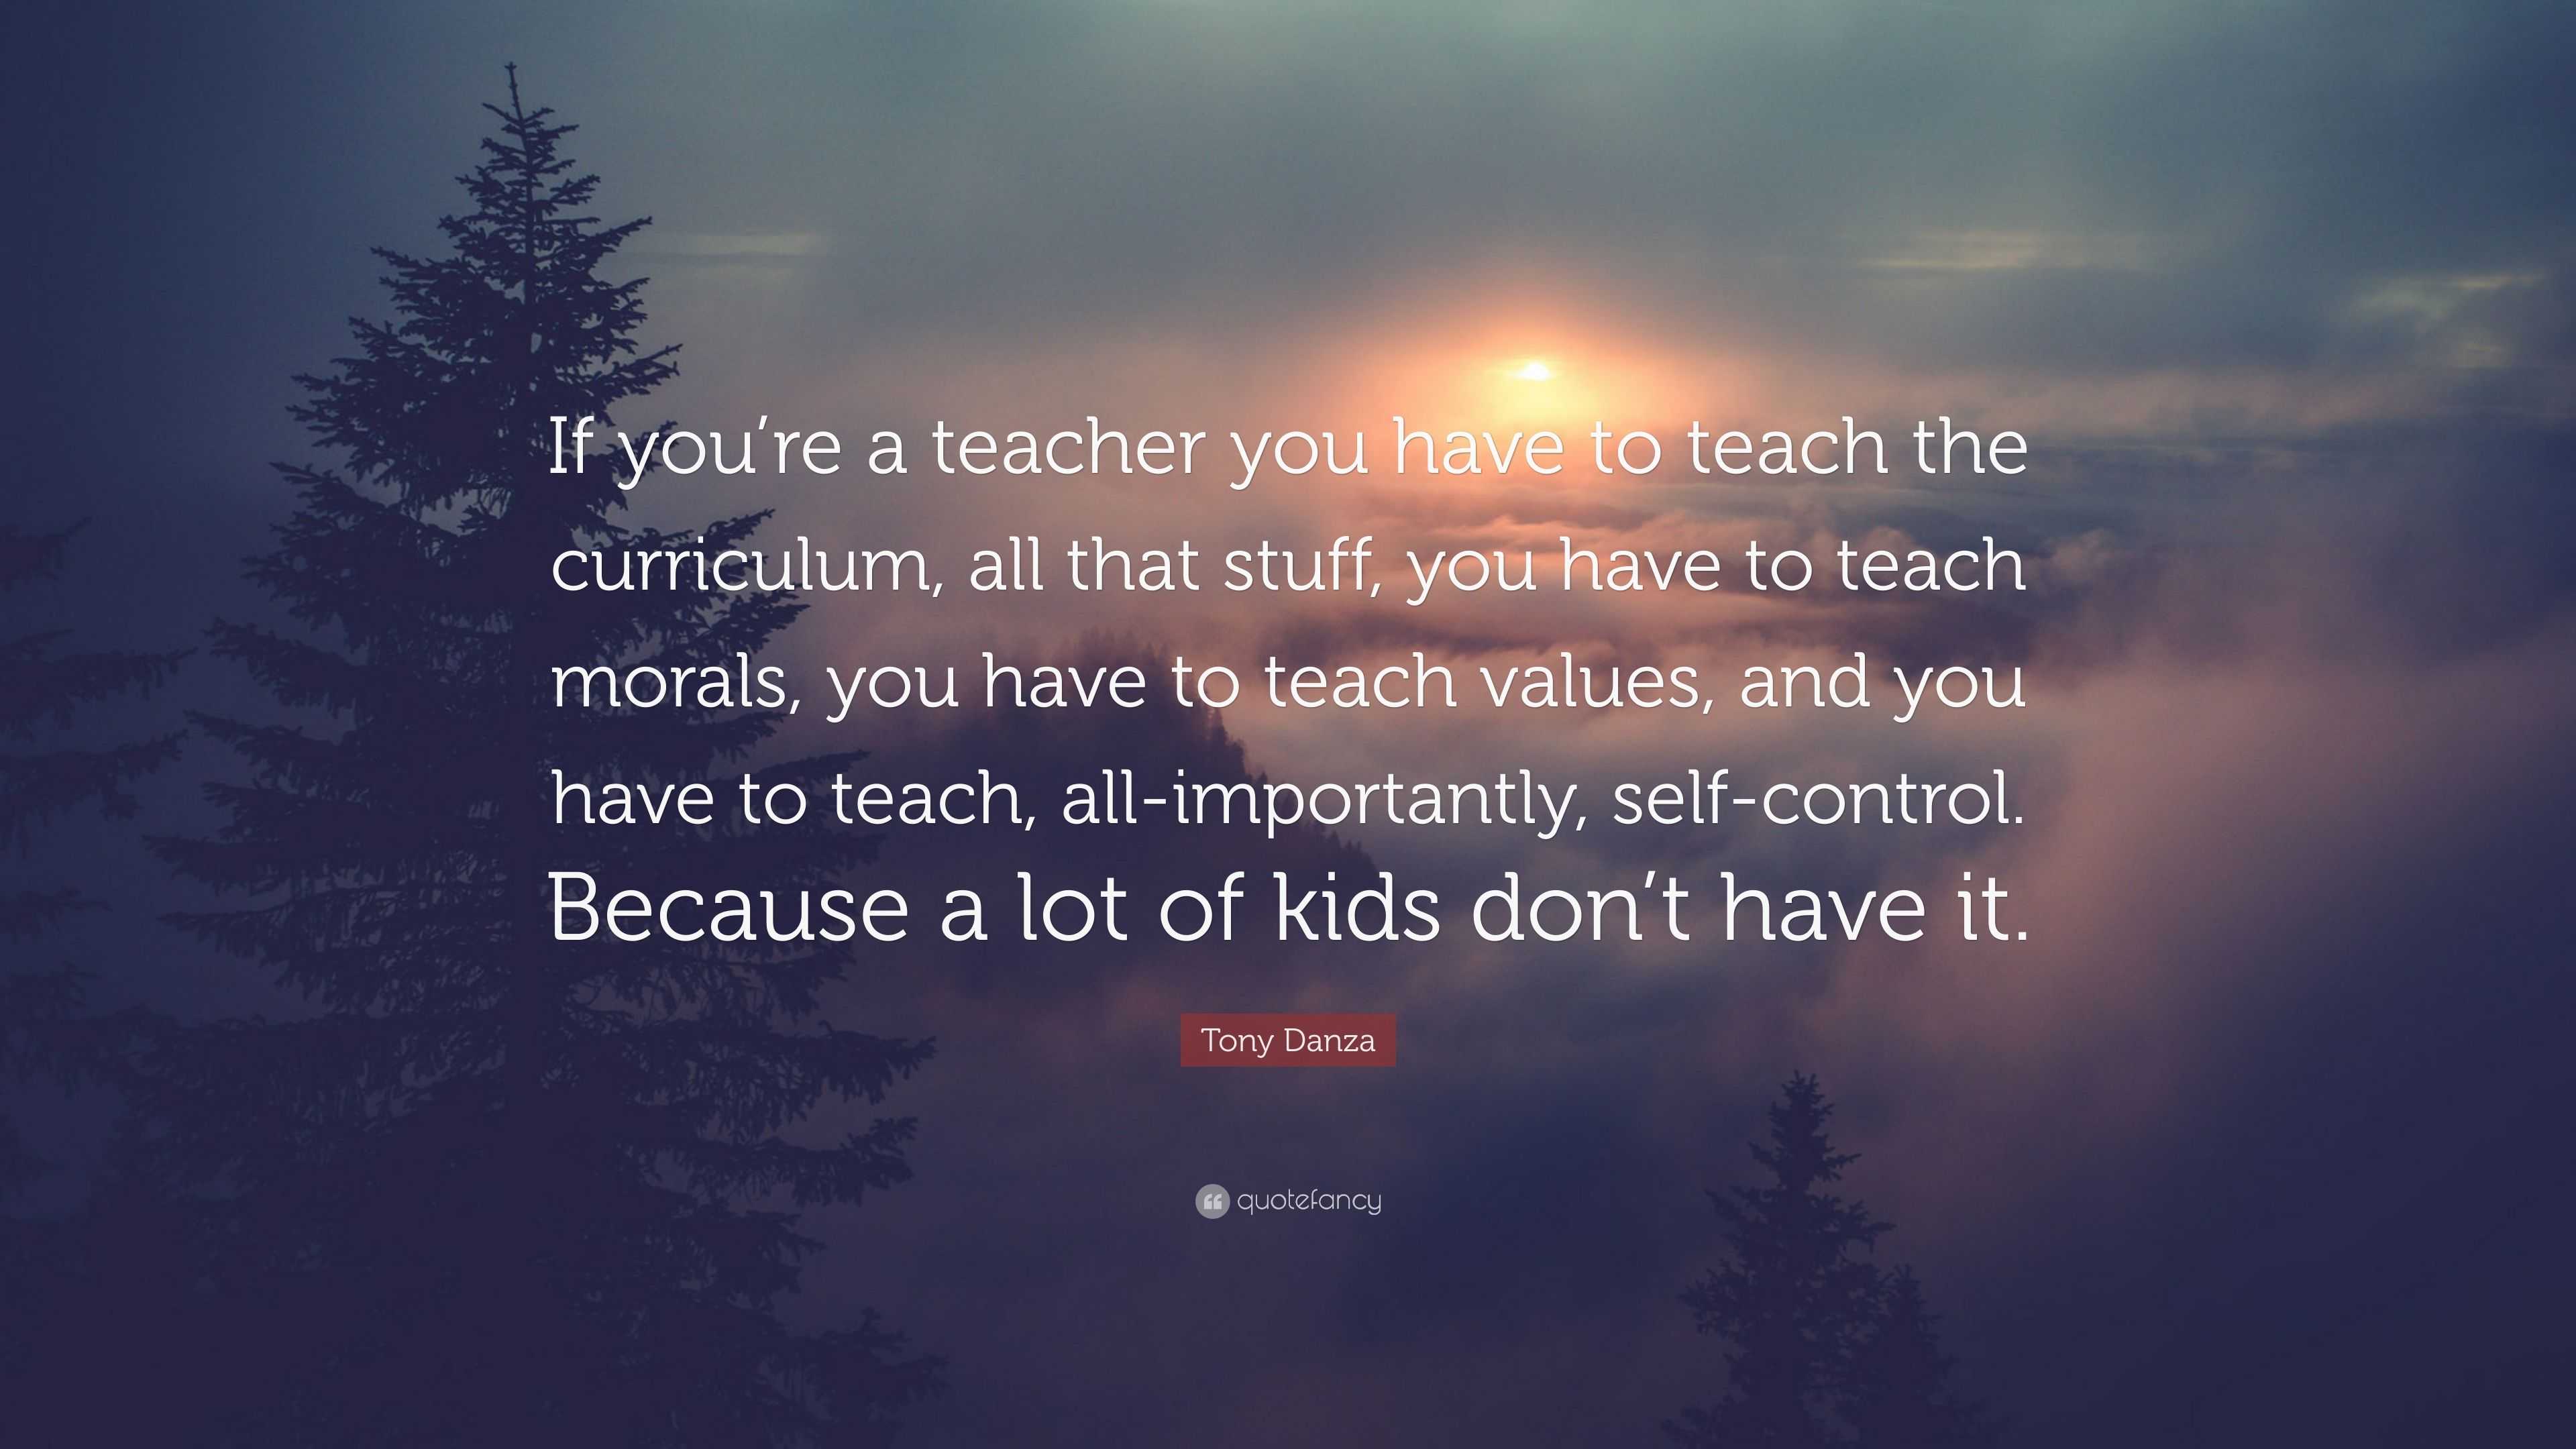 Tony Danza Quote: “If you’re a teacher you have to teach the curriculum ...